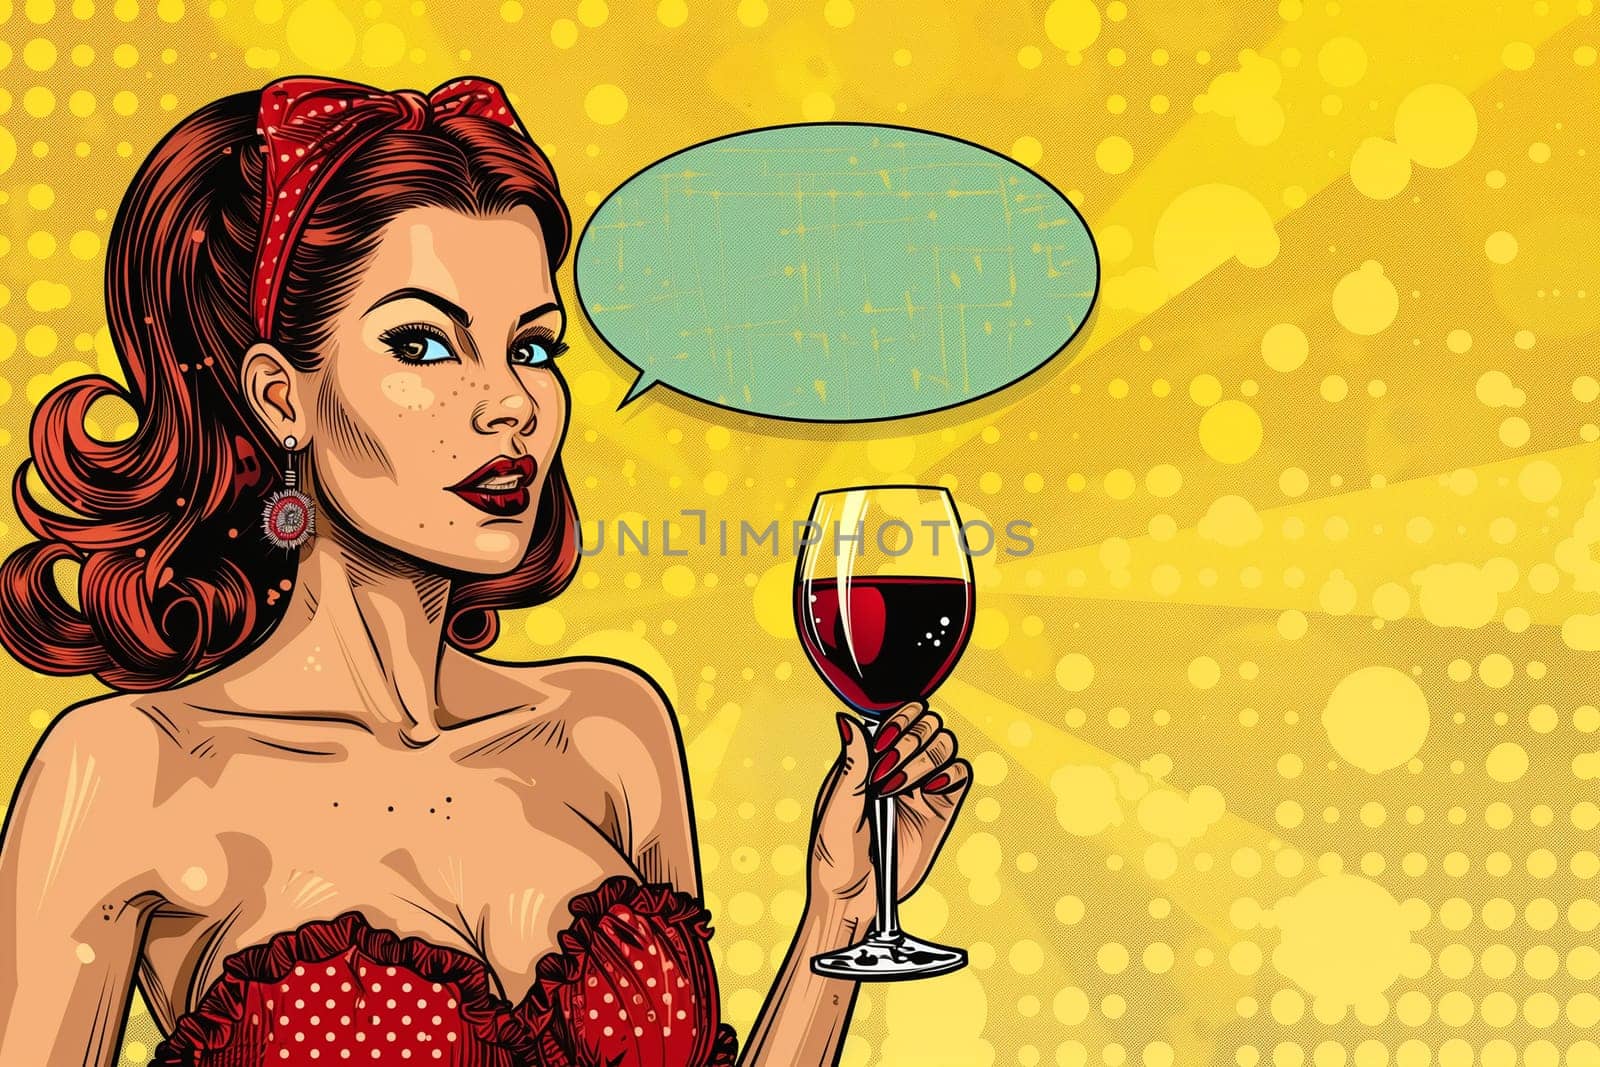 A woman holding a glass of wine with a speech bubble, engaging in a conversation.